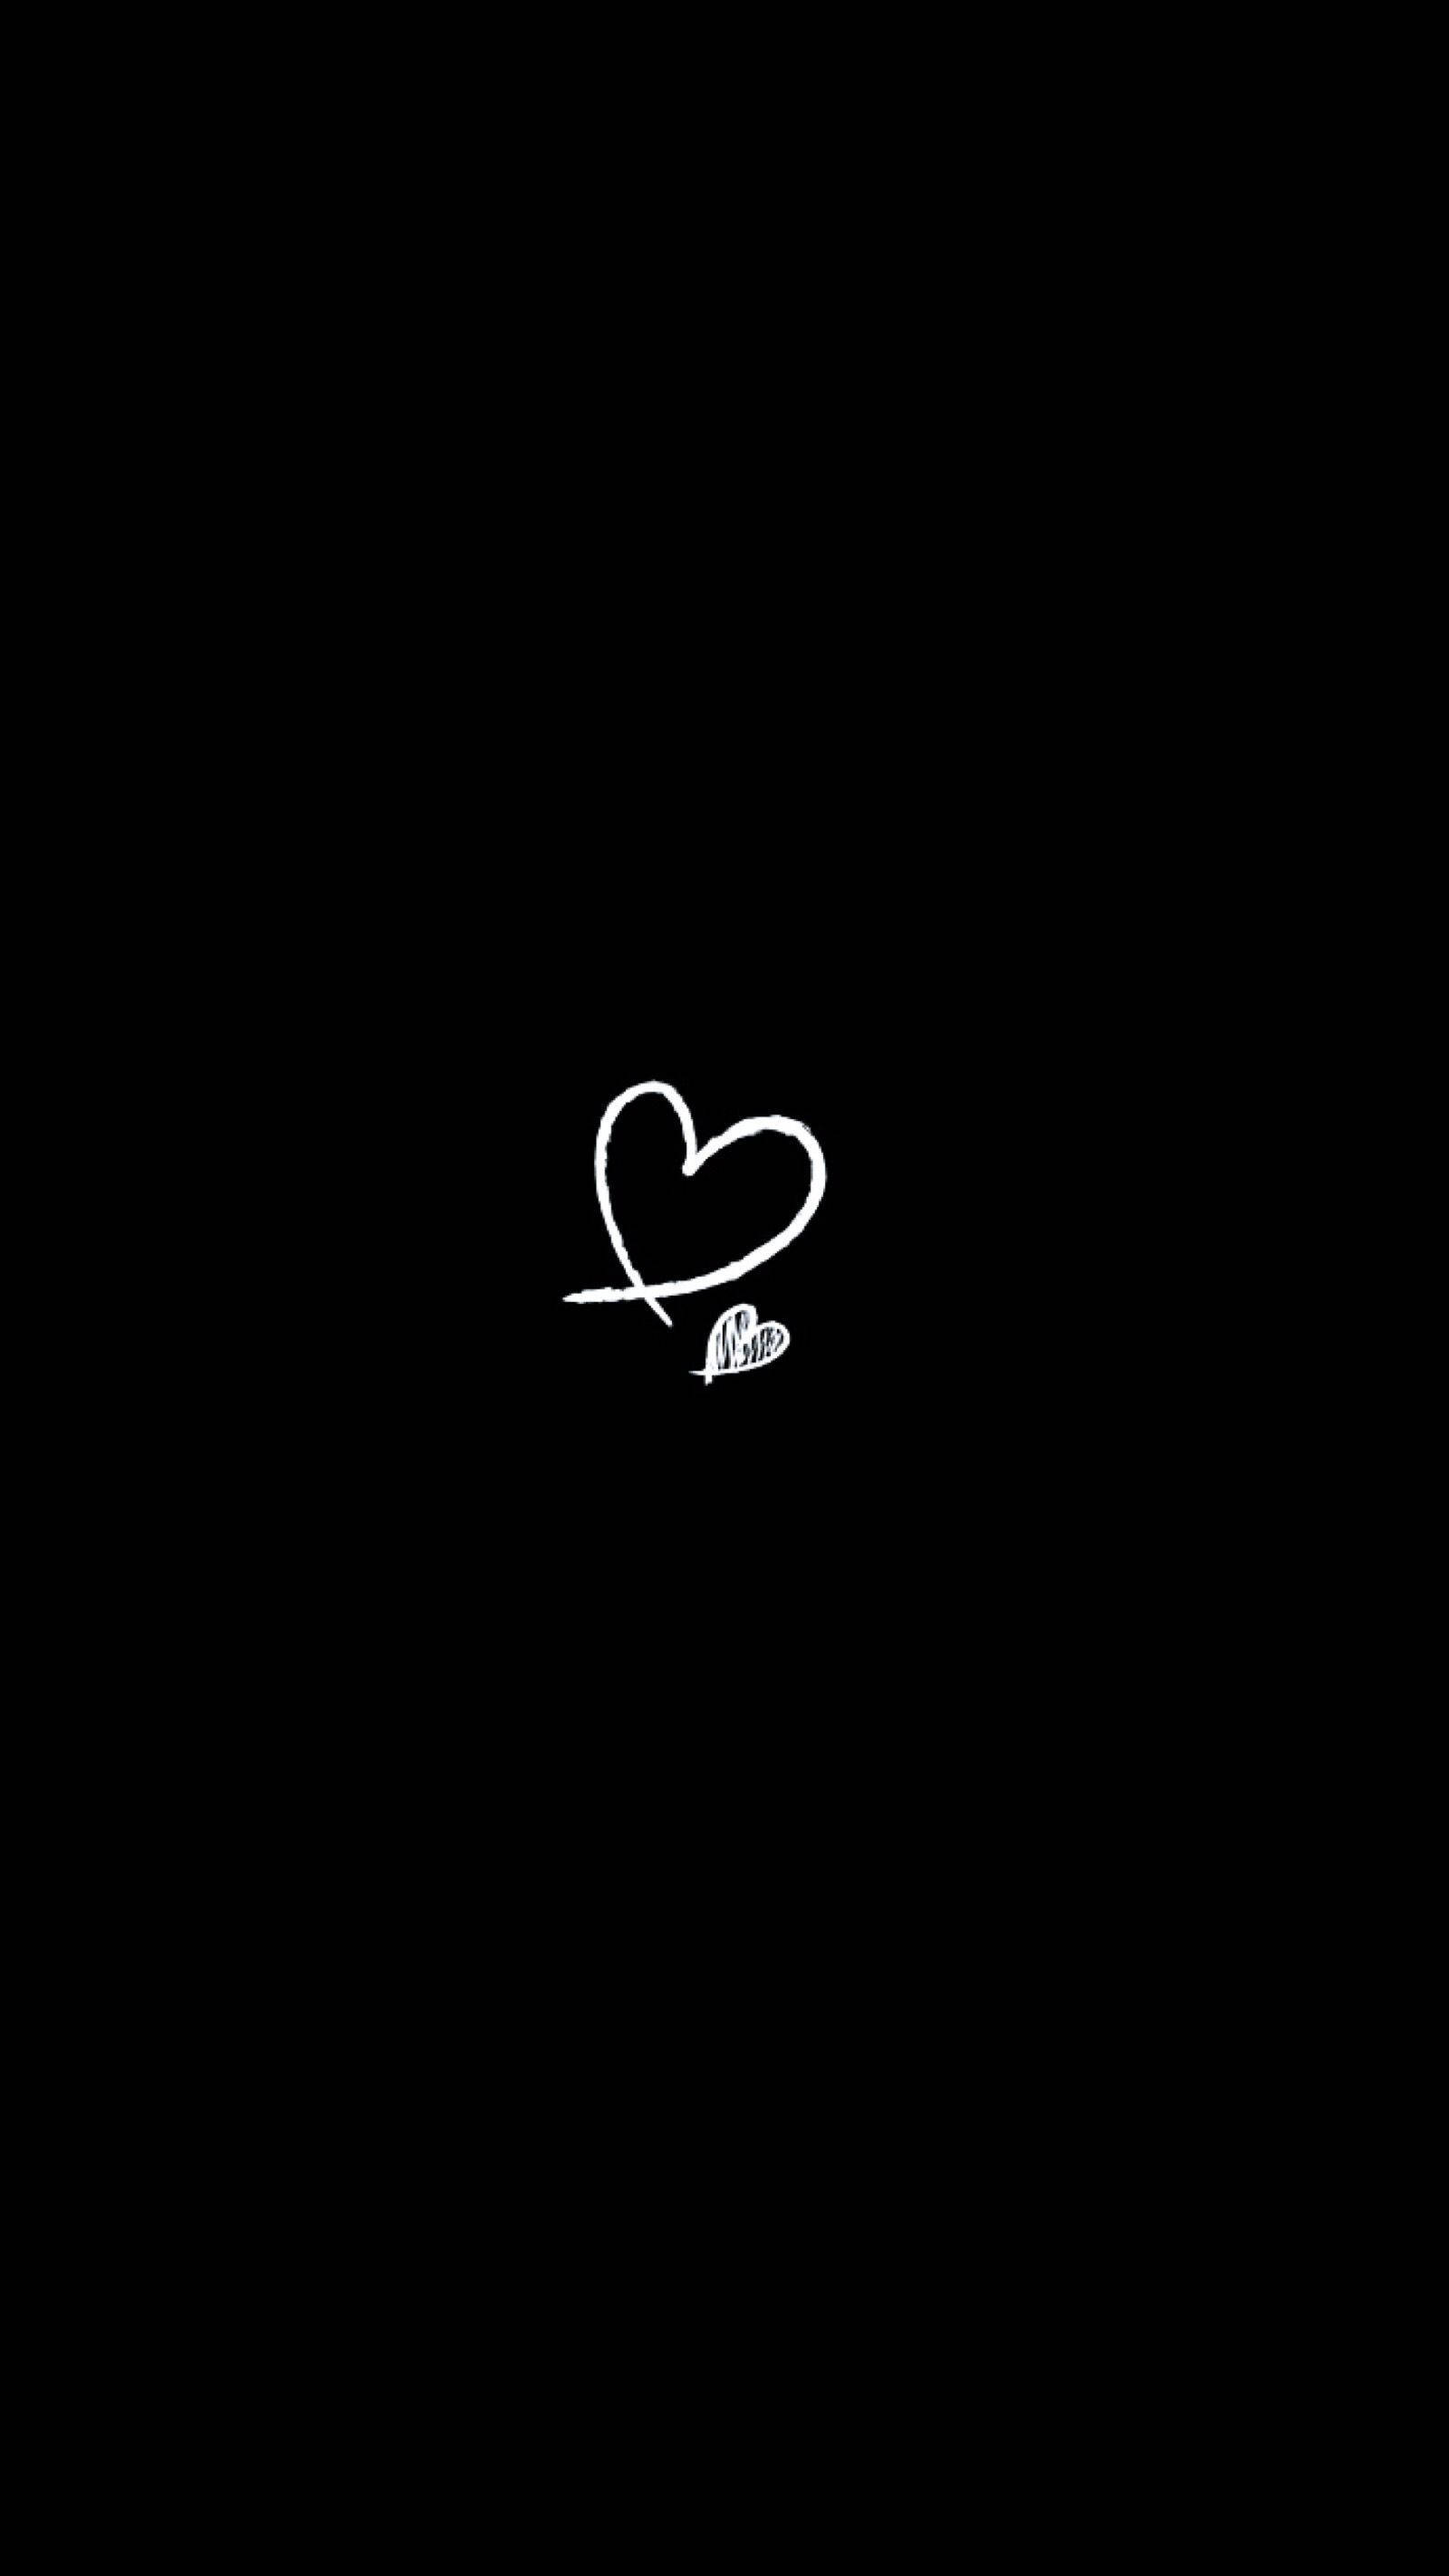 Download Heart Drawings Dark Girly Background Wallpaper | Wallpapers.com